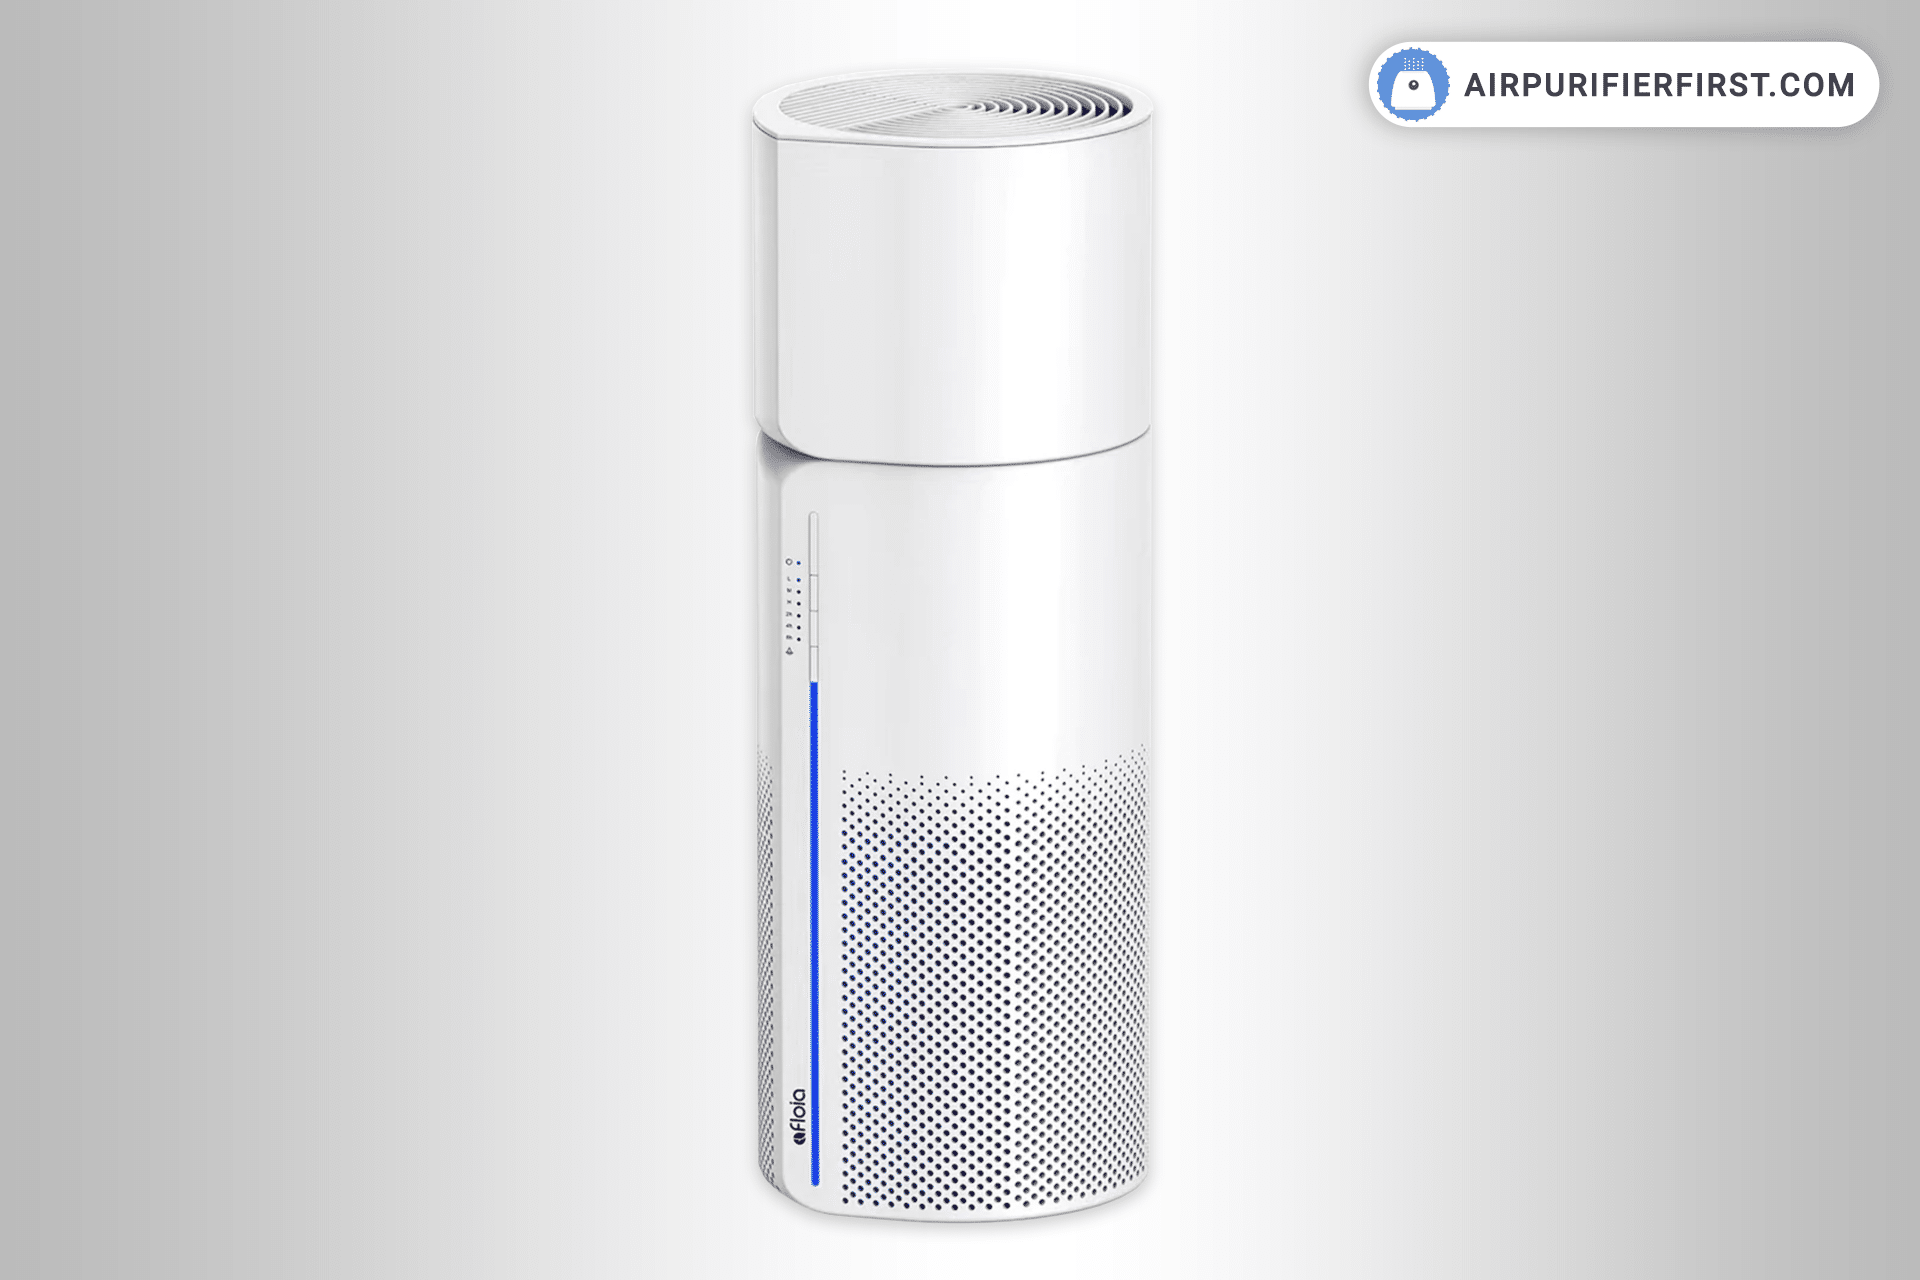 Afloia Miro Pro 2-IN-1 Air Purifier & Humidifier - Review